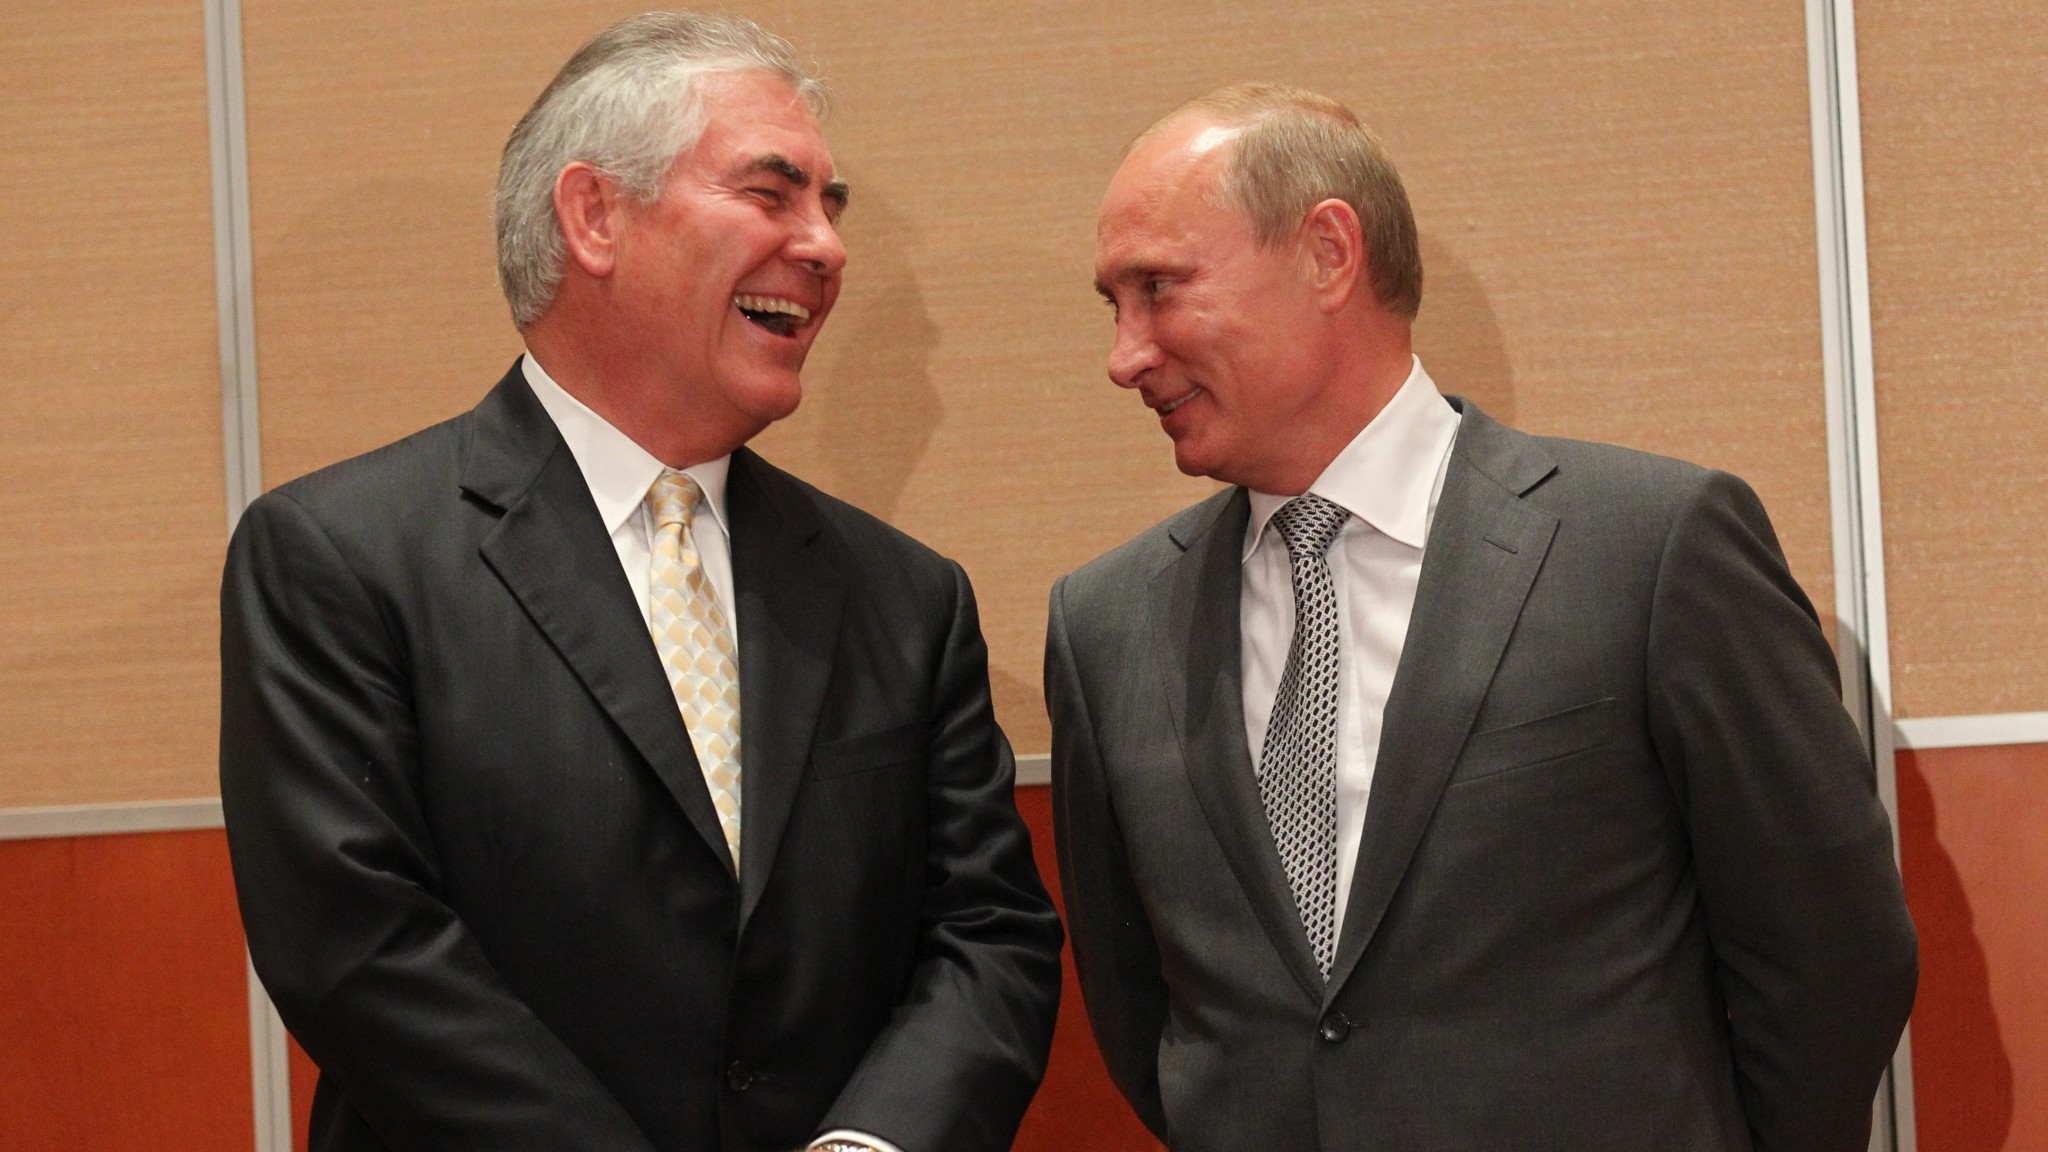 Sharing a laugh: Vladimir Putin with ExxonMobil CEO Rex Tillerson, Donald Trump’s pick for US secretary of state, the nation’s highest diplomatic post. (Image: Getty Images/Sasha Mordovets)